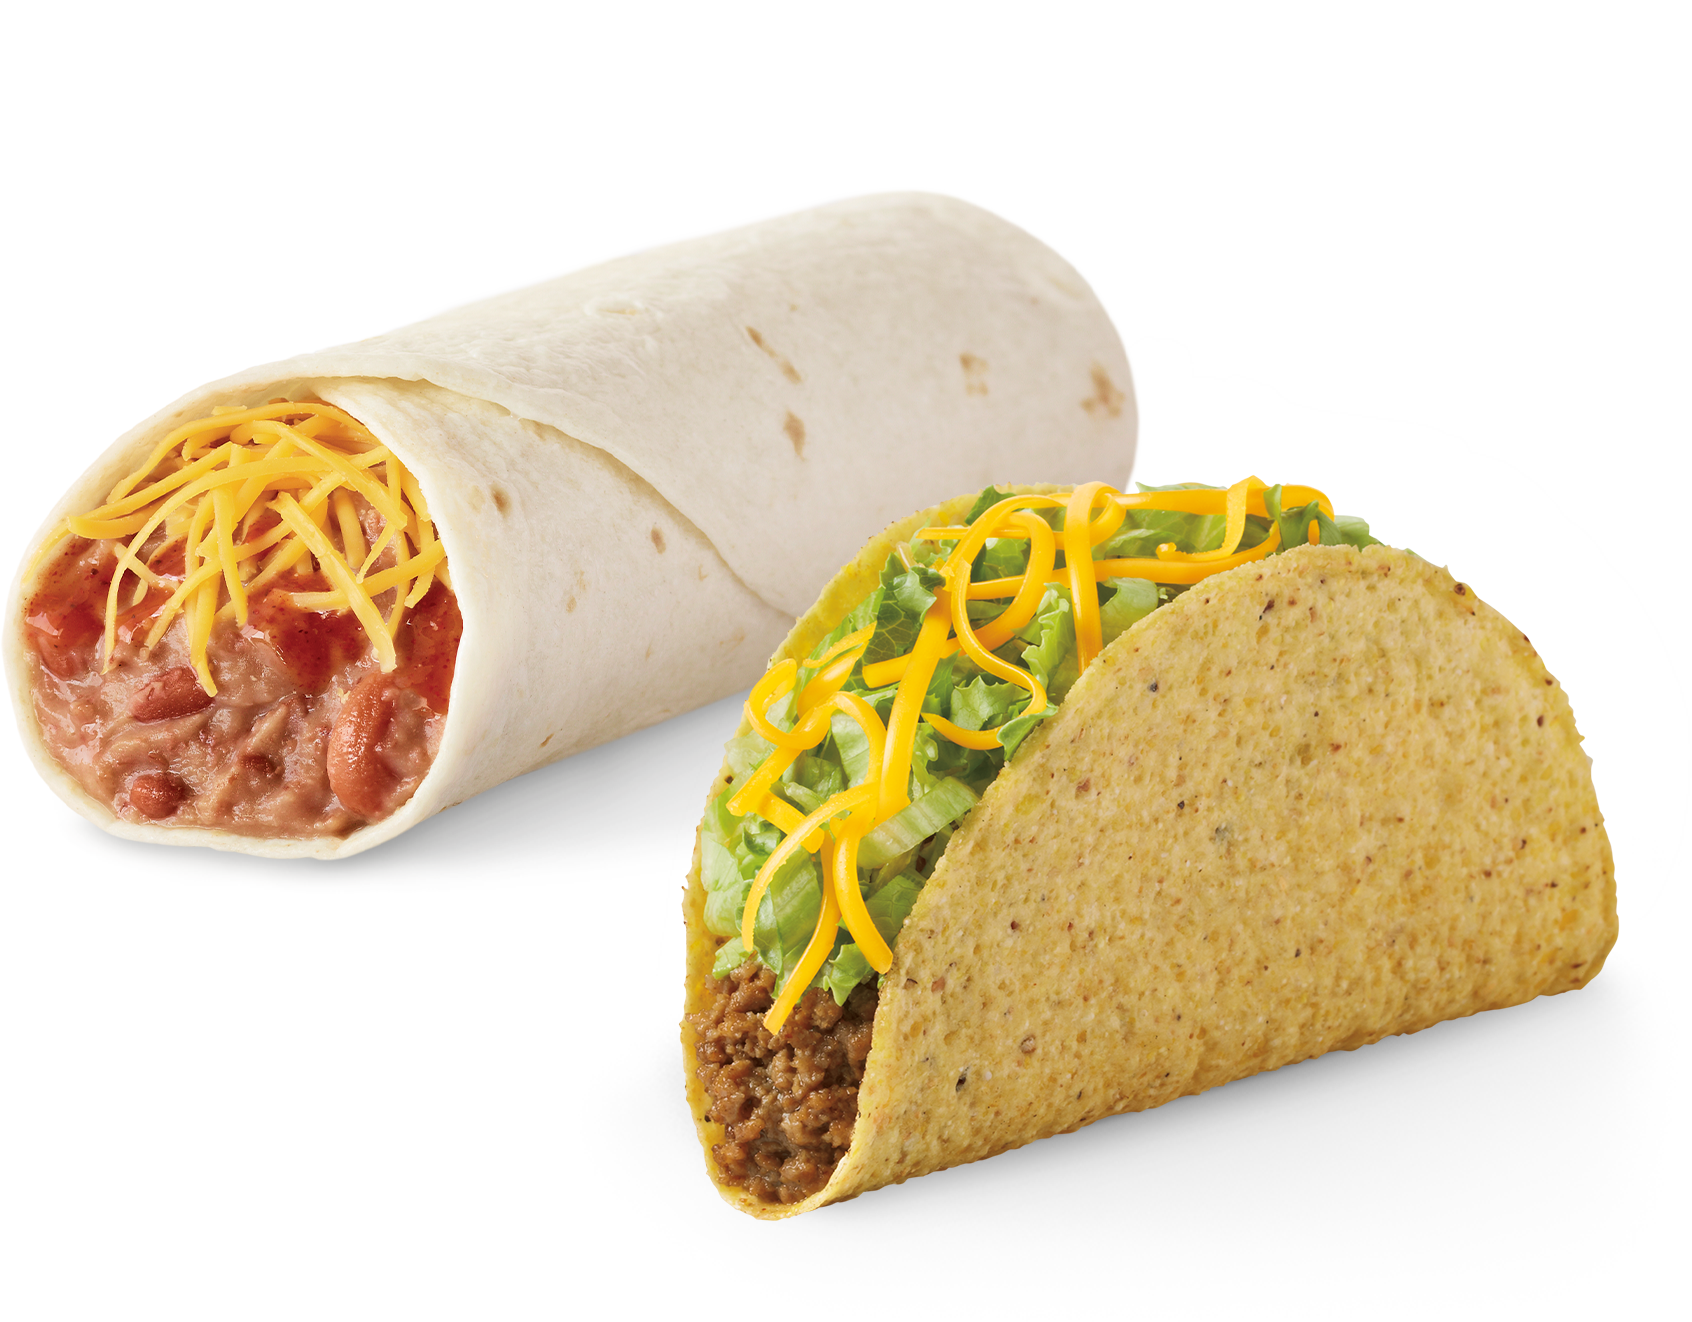 Bean and Cheese Burrito and Snack Taco